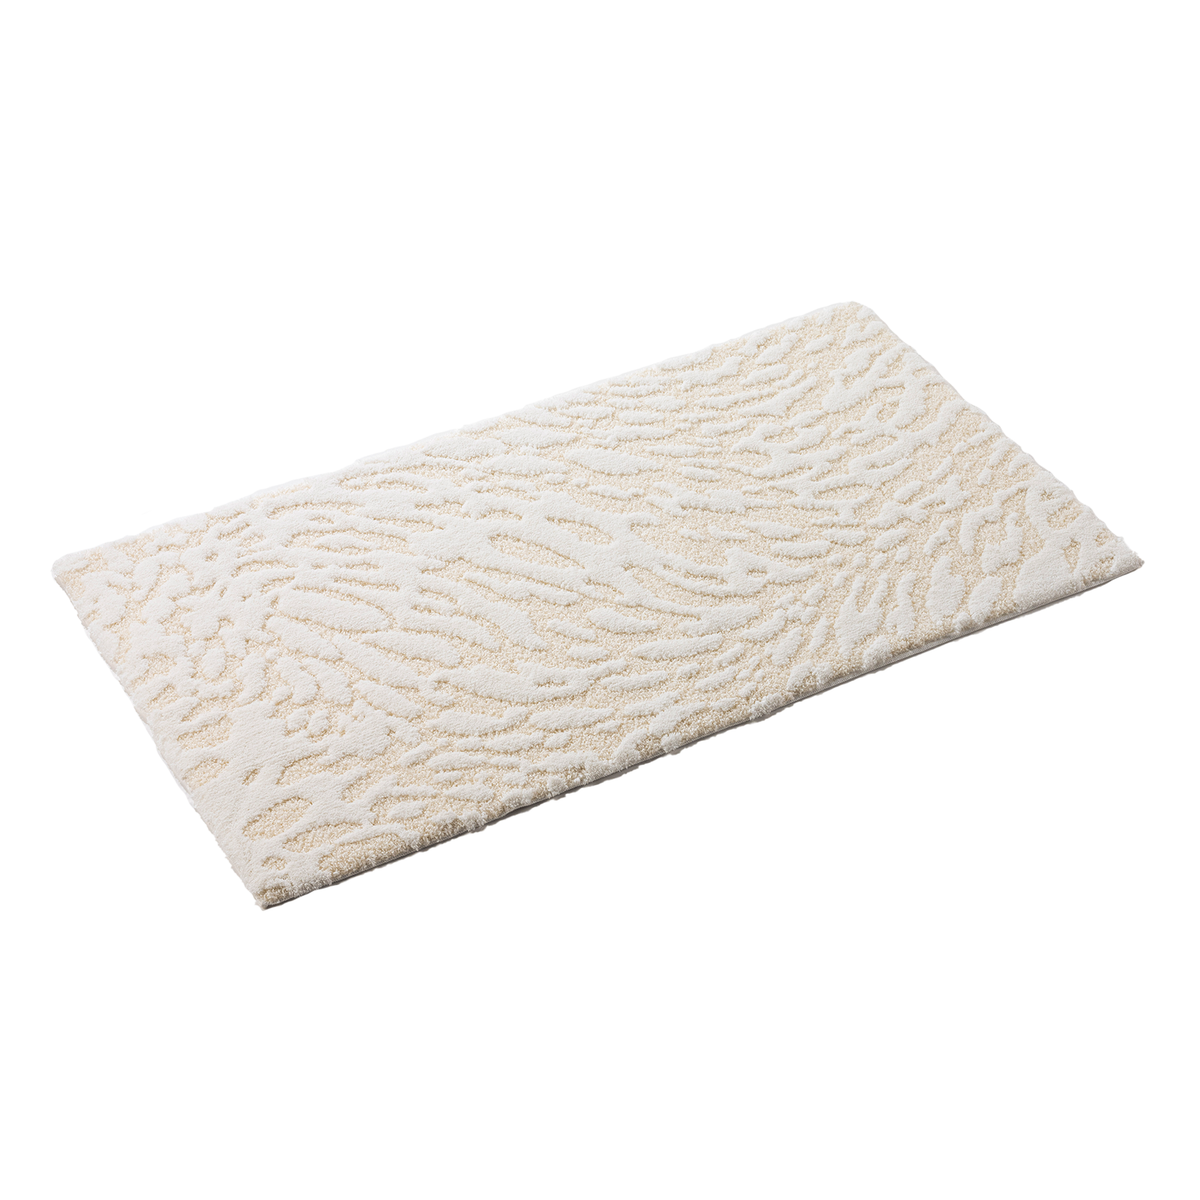 Slant Image of Abyss Habidecor Flow Bath Rugs in Color Ivory (103)